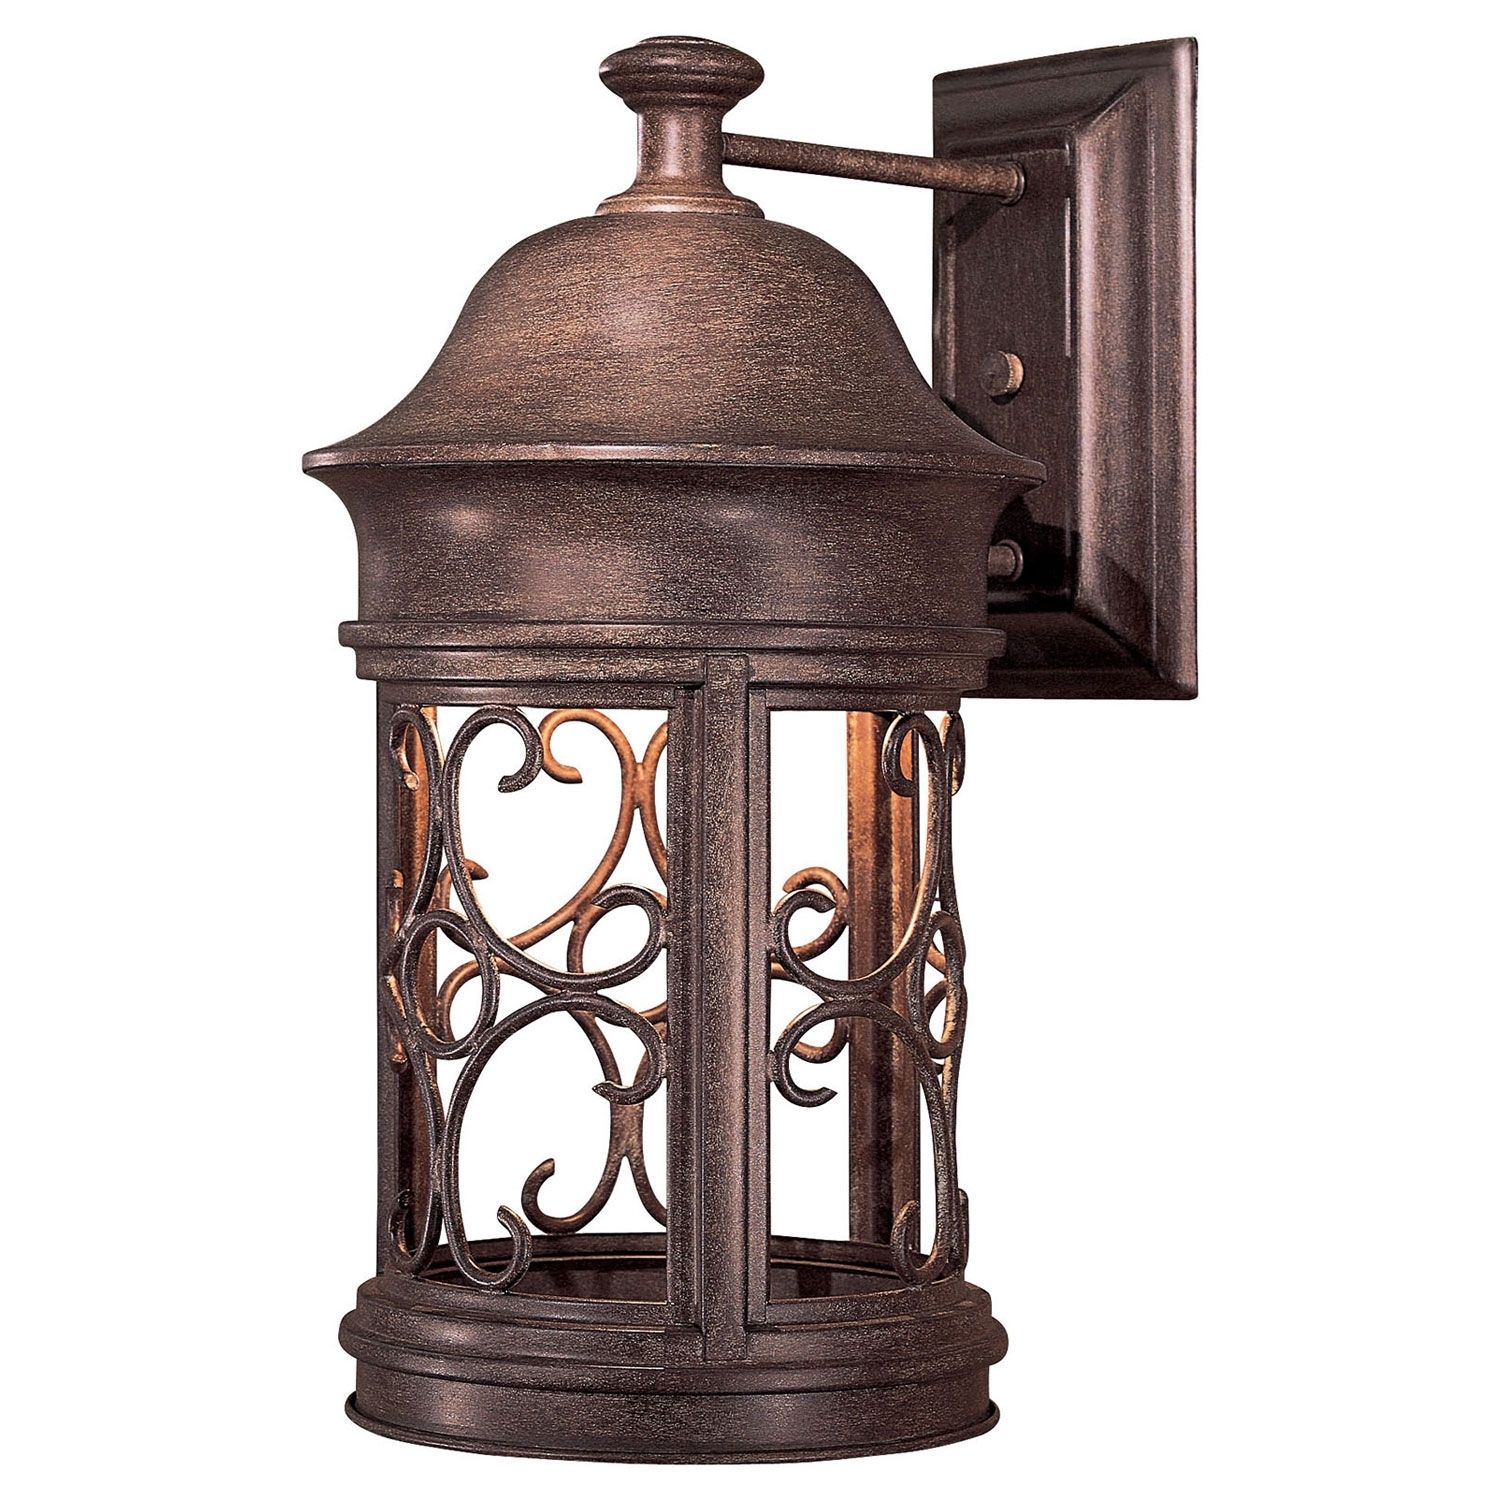 Minka Lavery Sage Ridge Dark Sky Large Outdoor Wall Mount 8282 A61 Intended For Large Outdoor Wall Lanterns (View 19 of 20)